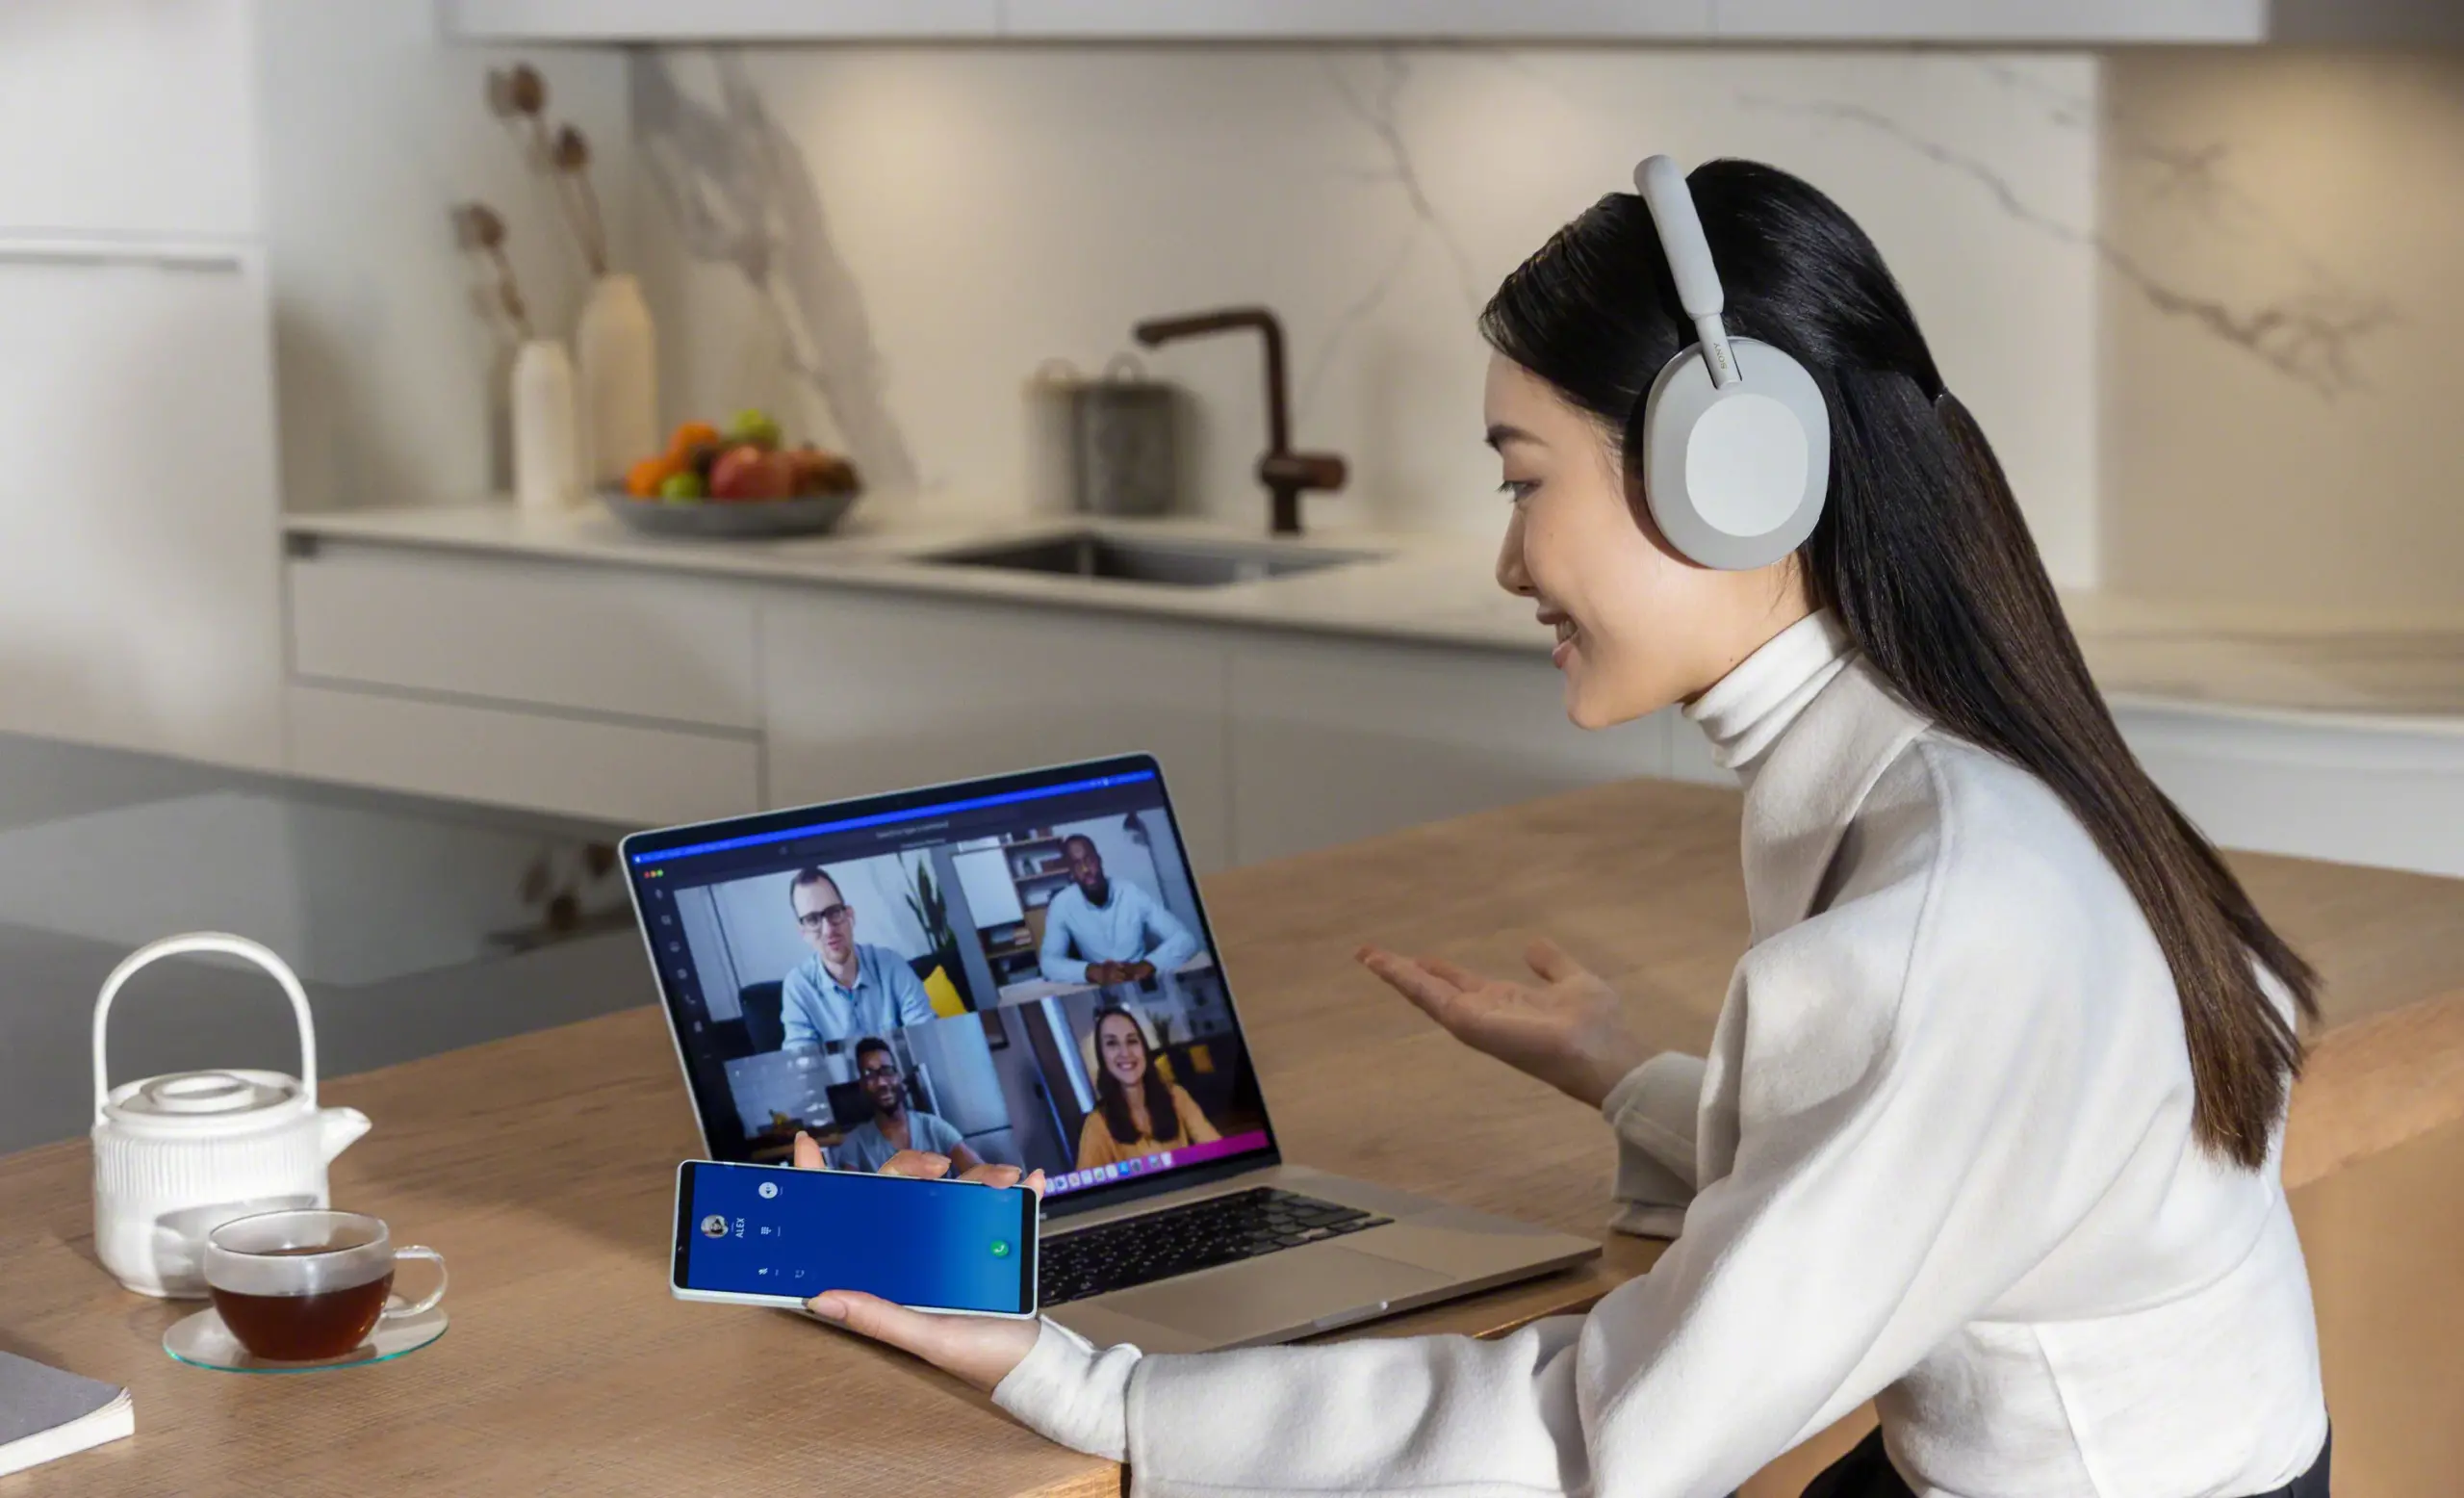 image of women in kitchen on video call using WH-1000XM5 headphones by Sony